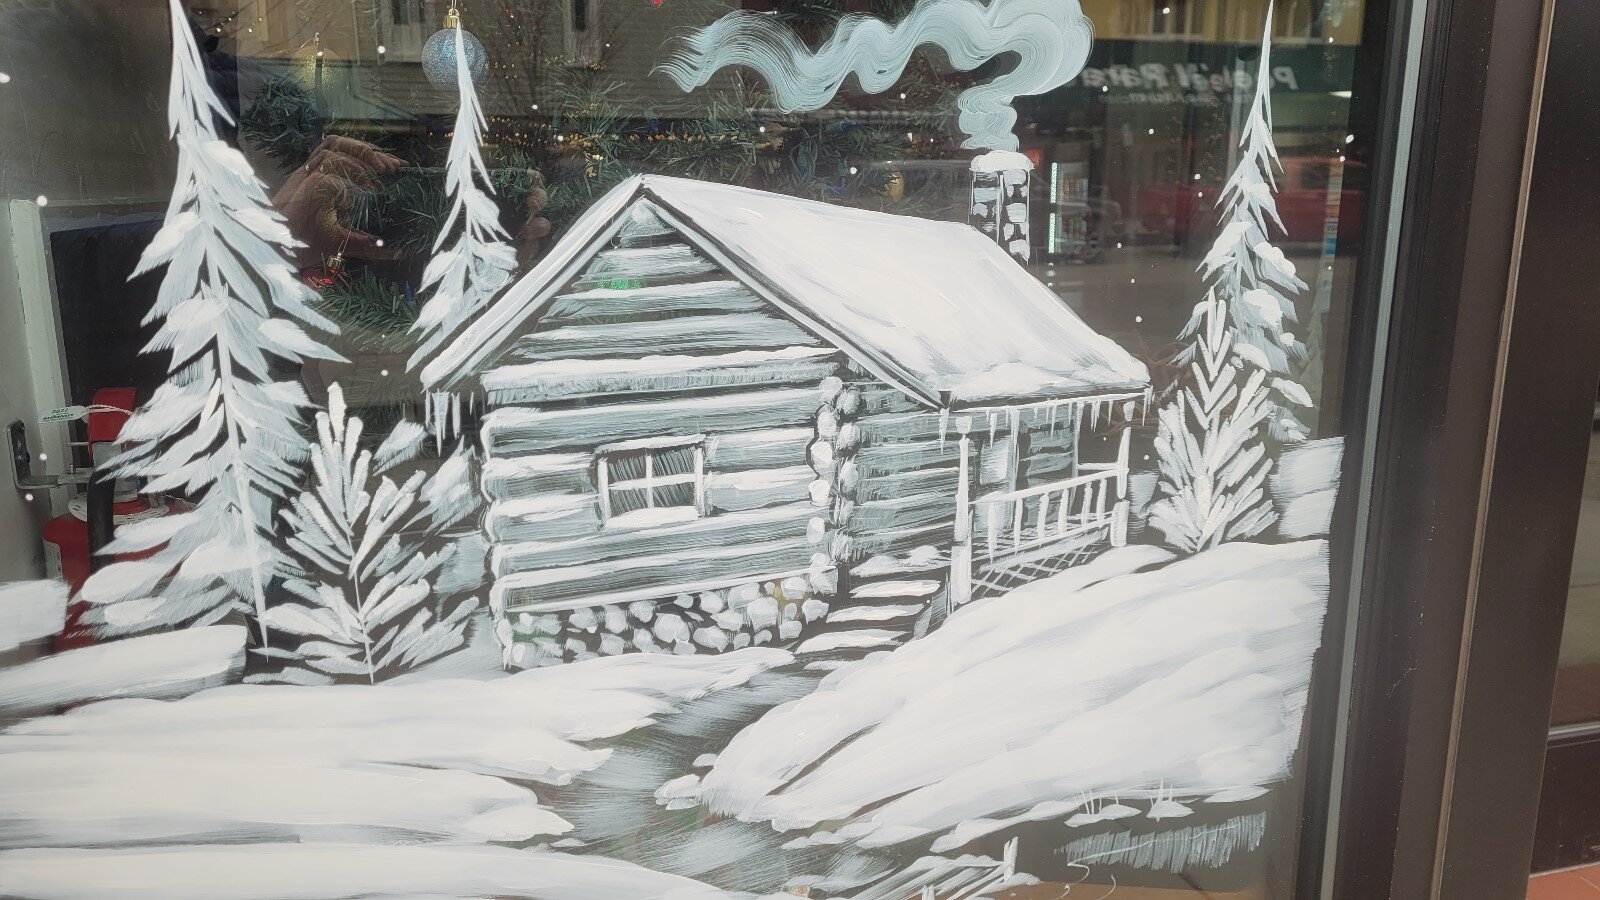 This log cabin is one of many paintings done by the Brush Monkeys.